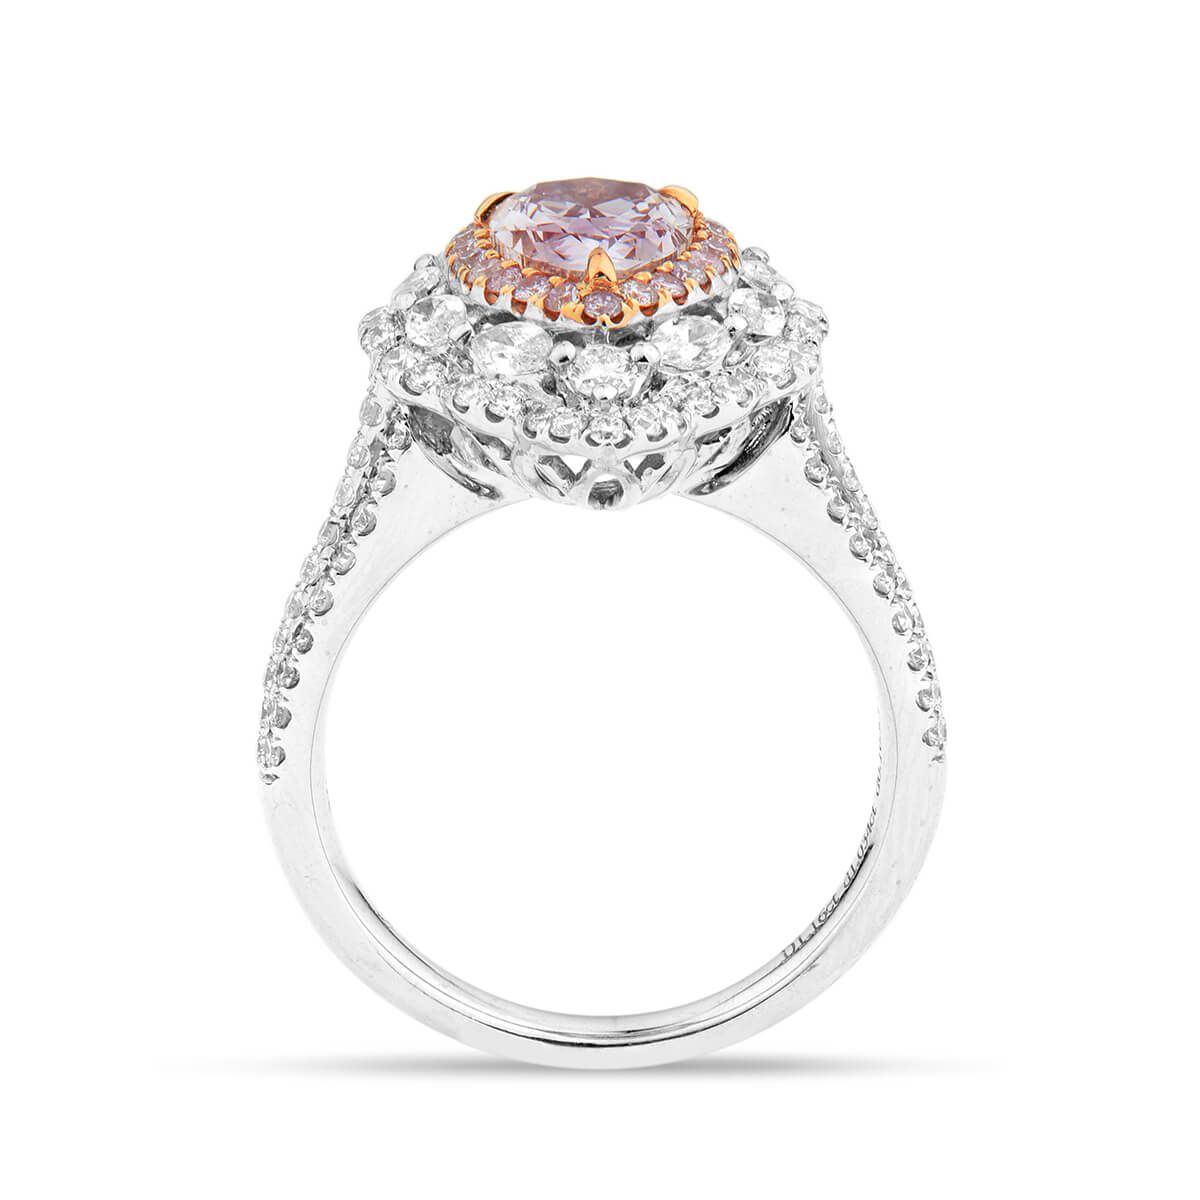 Fancy Brown Pink Diamond Ring, 2.32 Ct. TW, Pear shape, GIA Certified, 1205184772